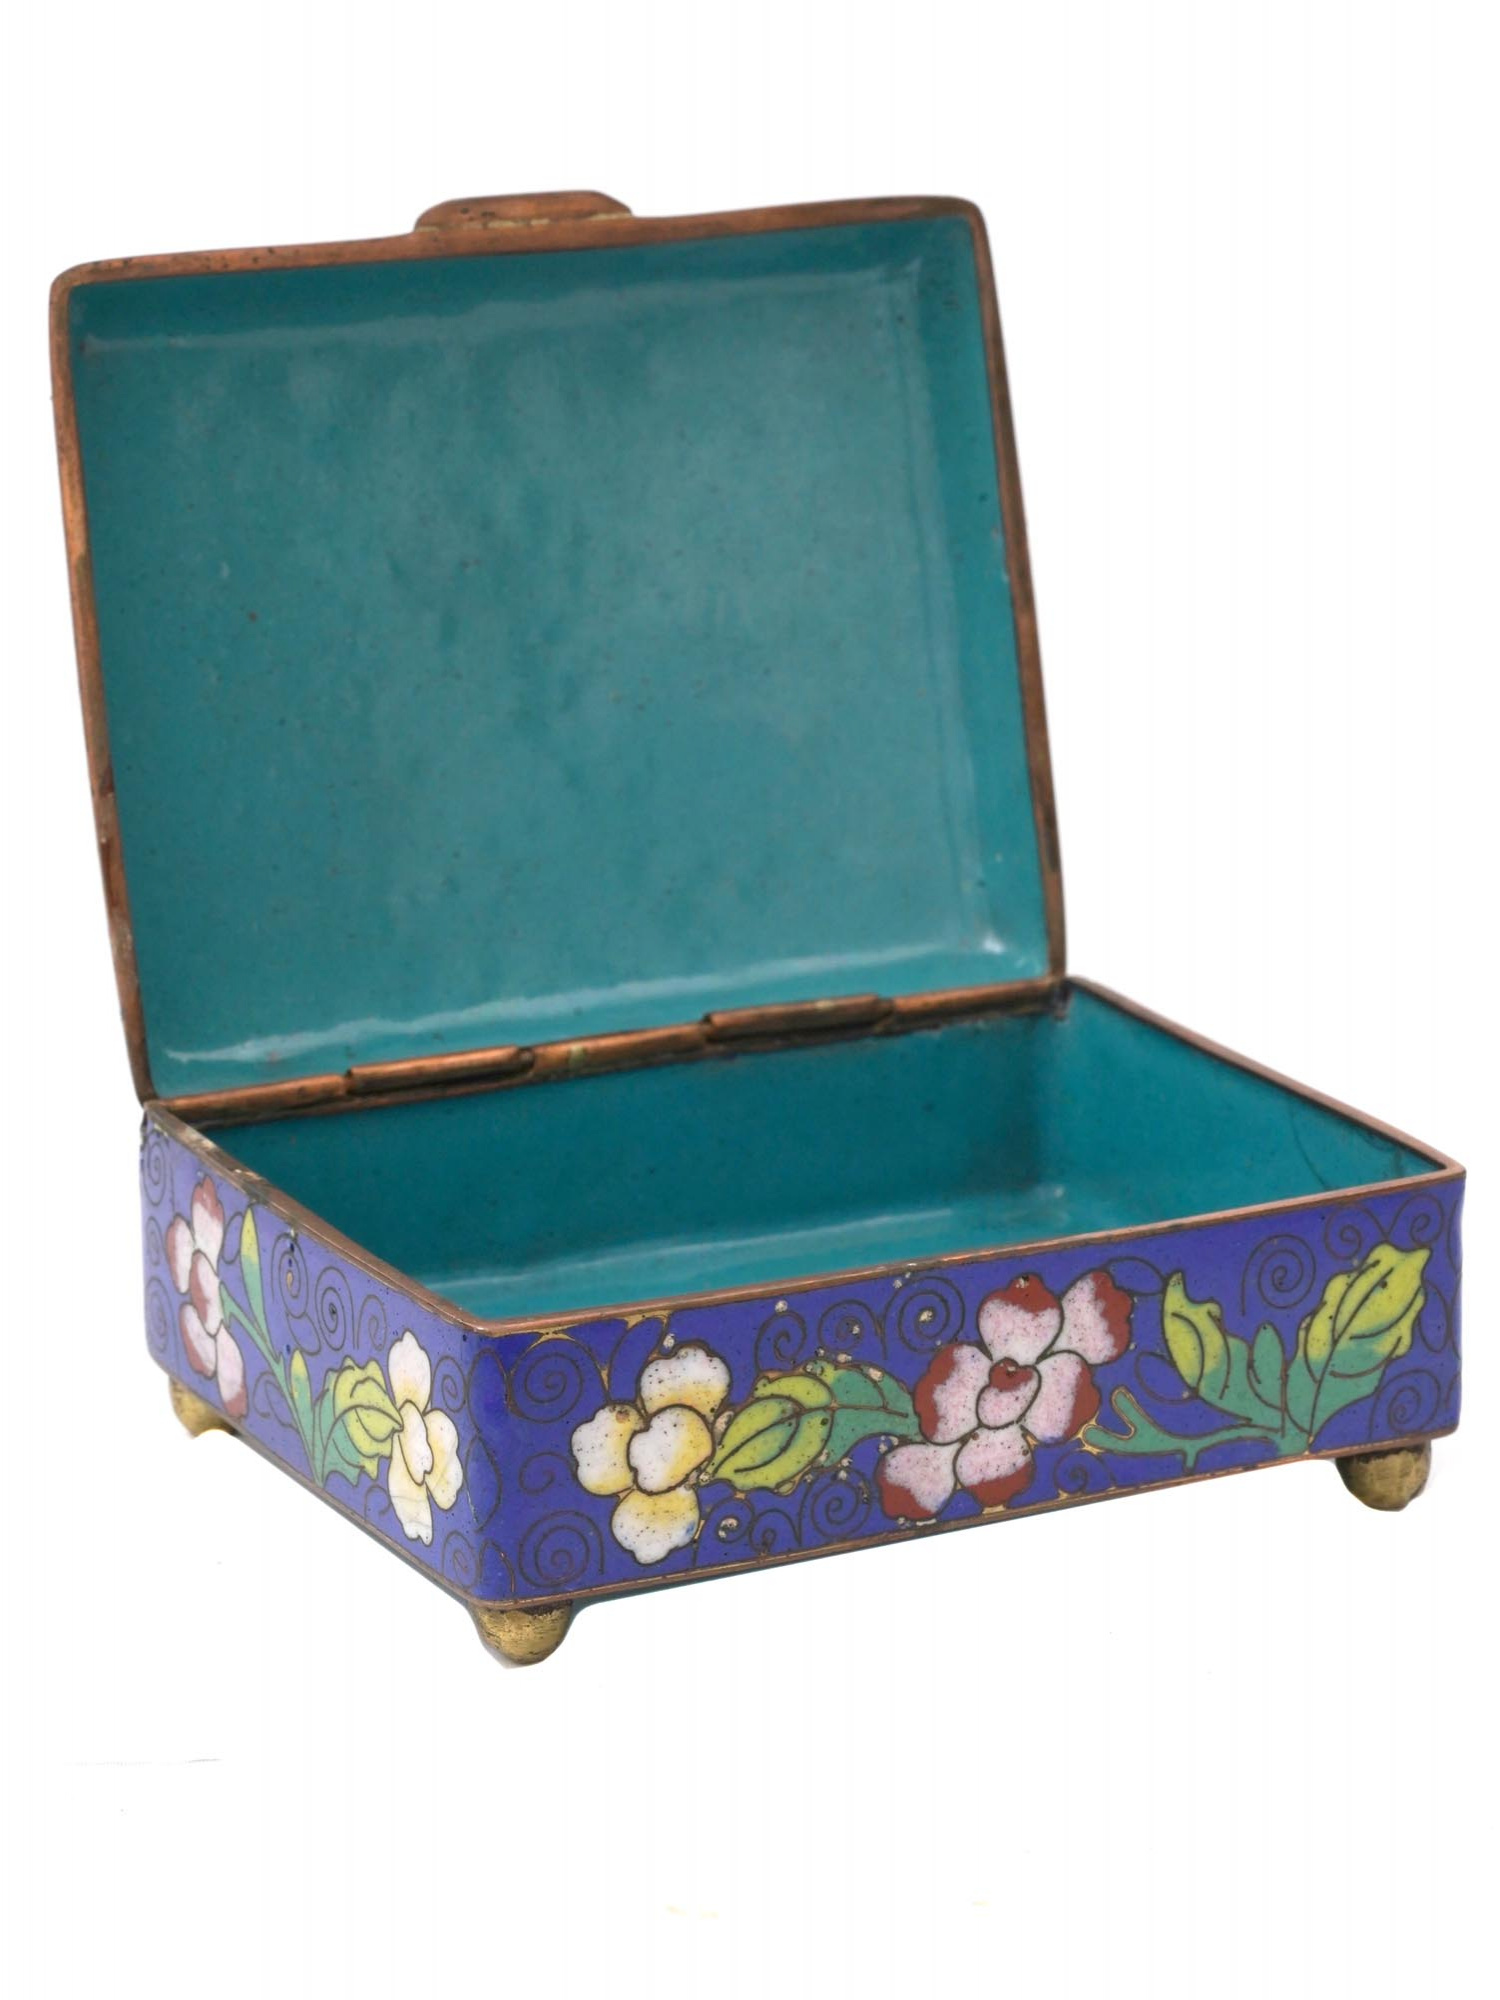 ANTIQUE CHINESE COVERED FLORAL CLOISONNE ENAMEL BOX PIC-1